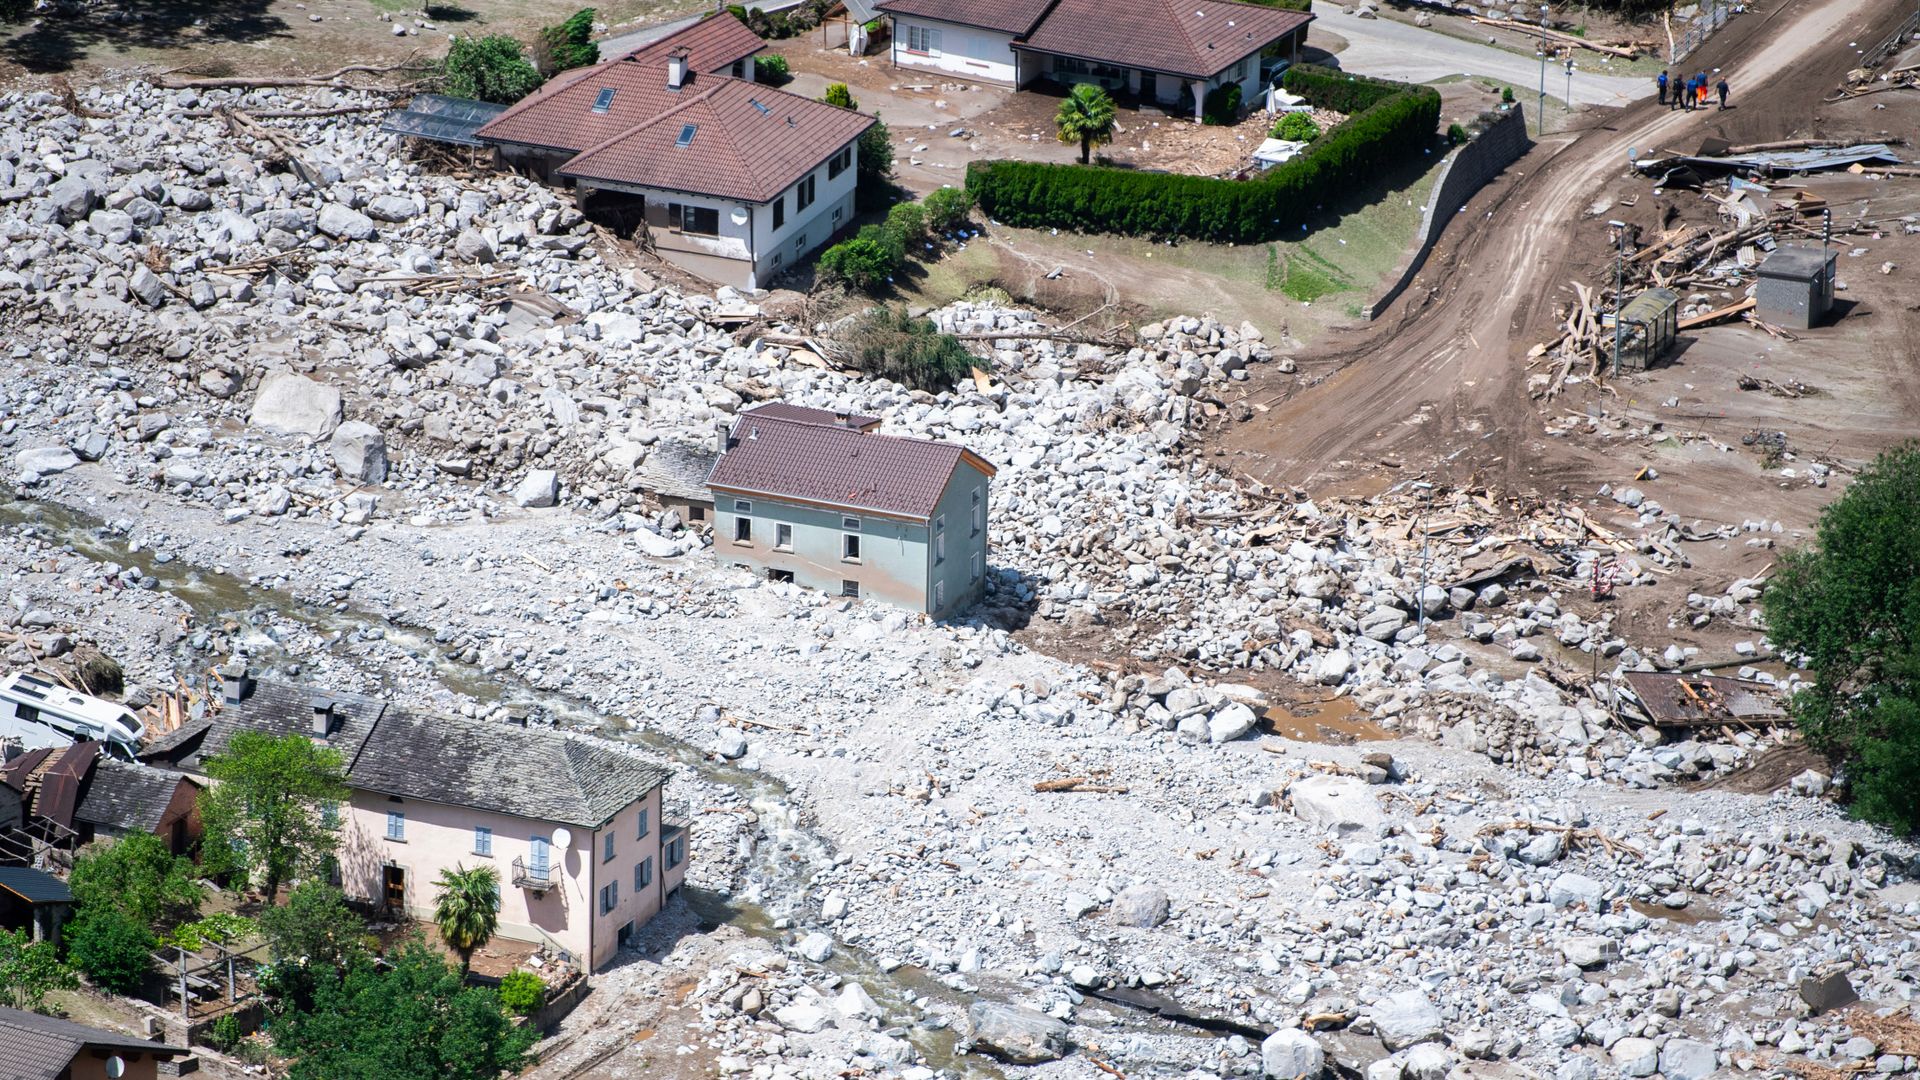 Three people missing after once-in-30-year rains cause floods and landslides in Switzerland 